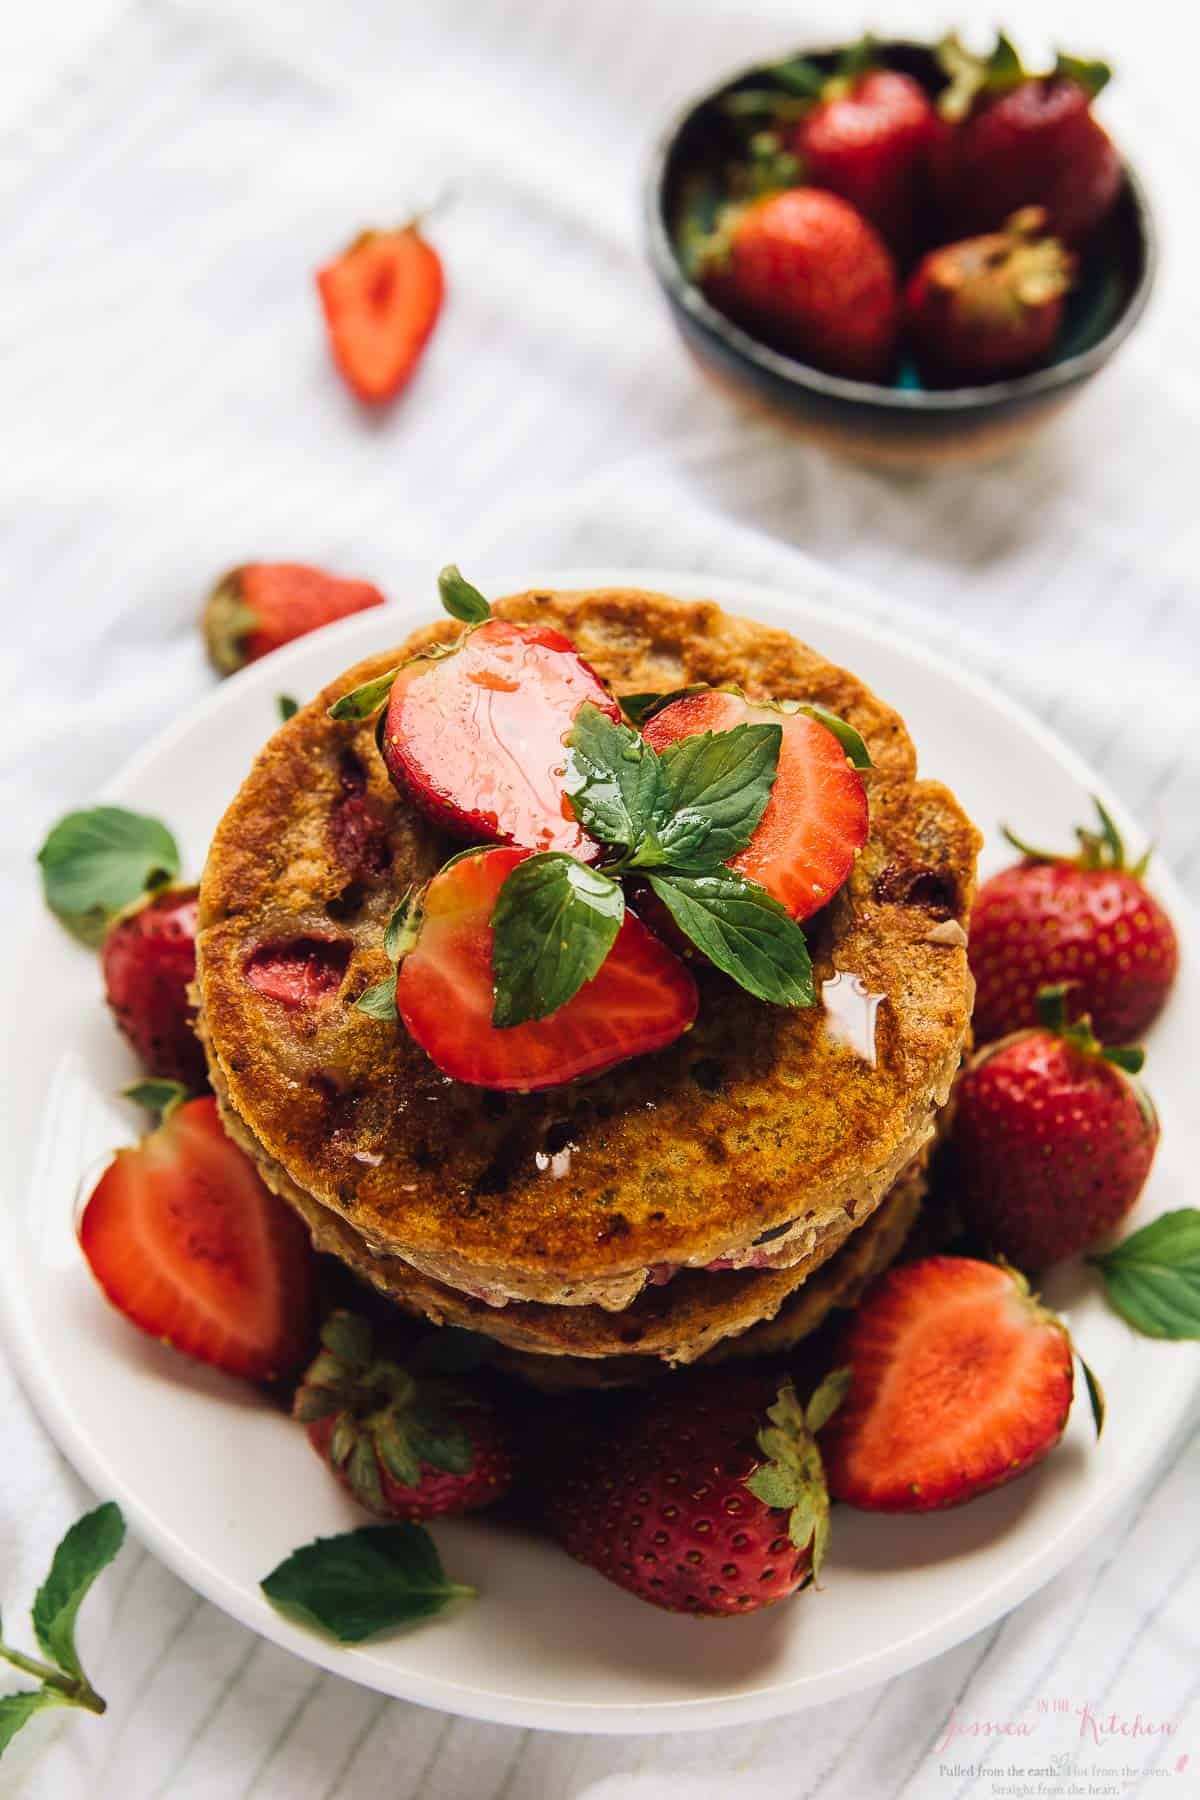 Stack of strawberry pancakes on white plate, garnished with berries and syrup